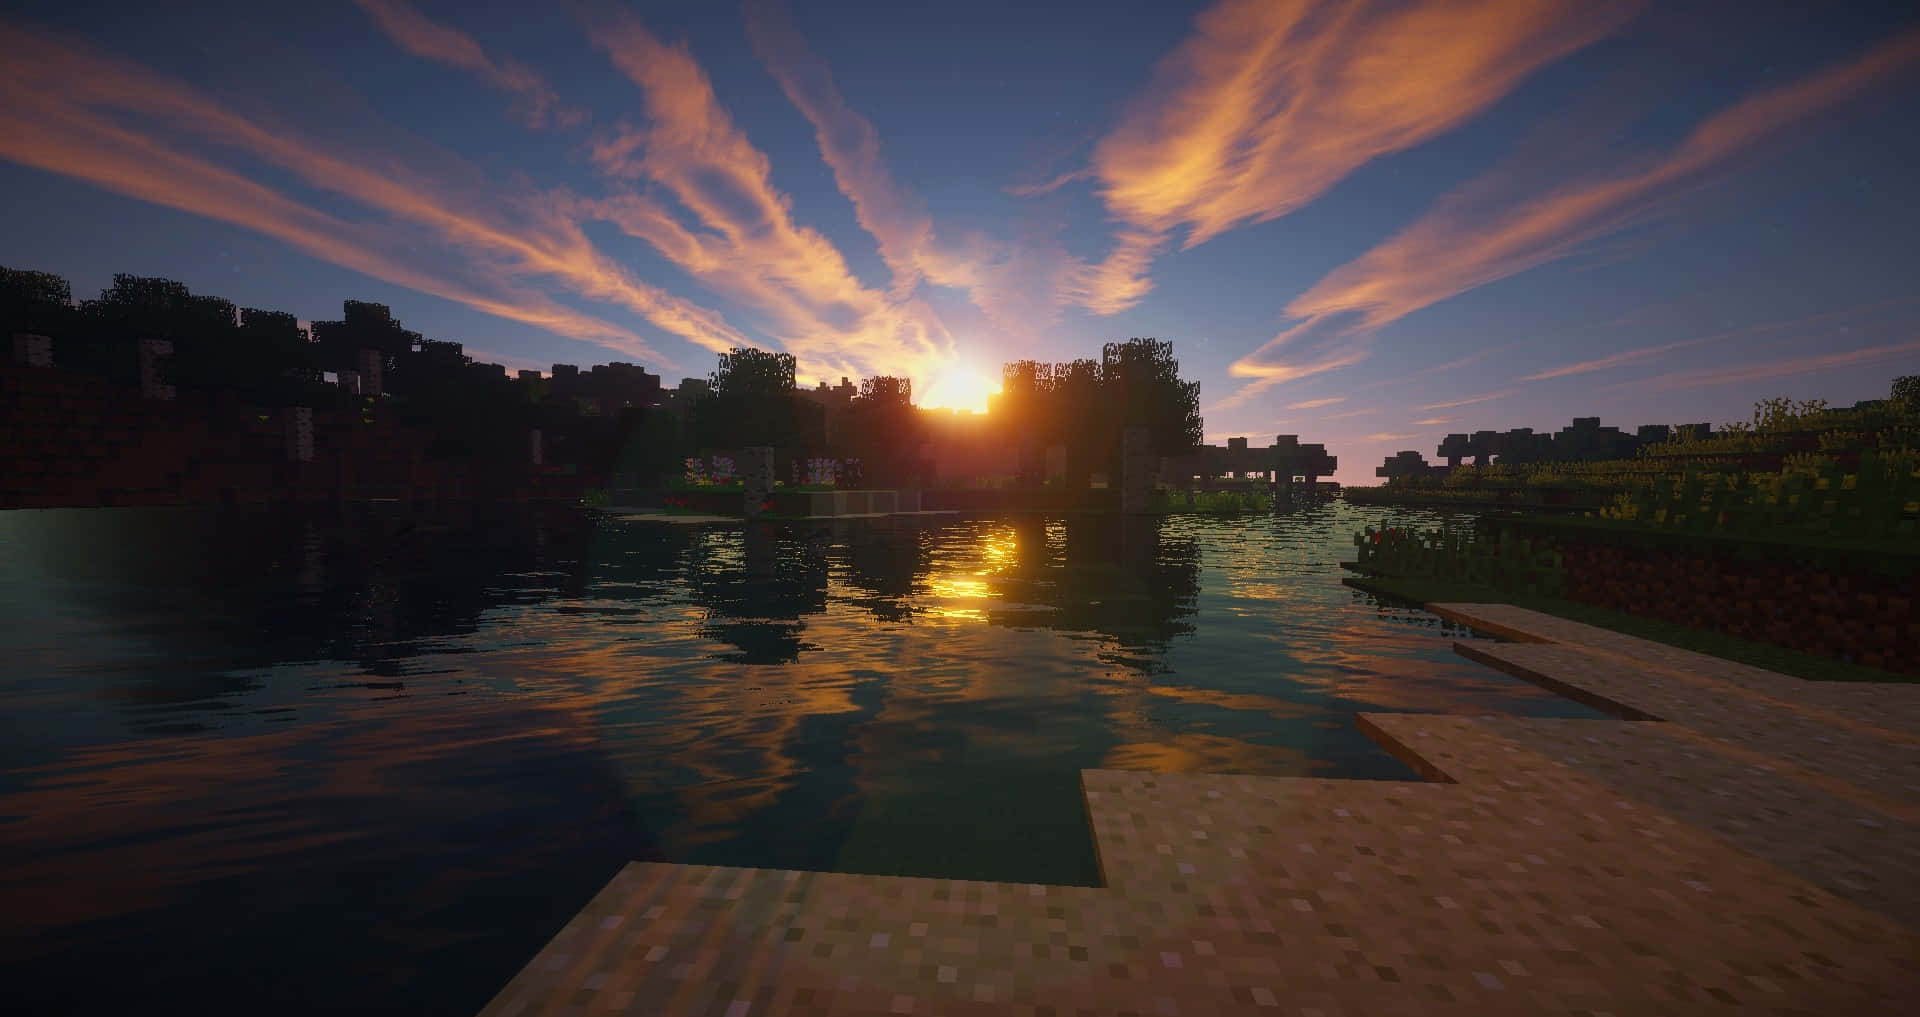 A peacefull sunset in Minecraft Wallpaper